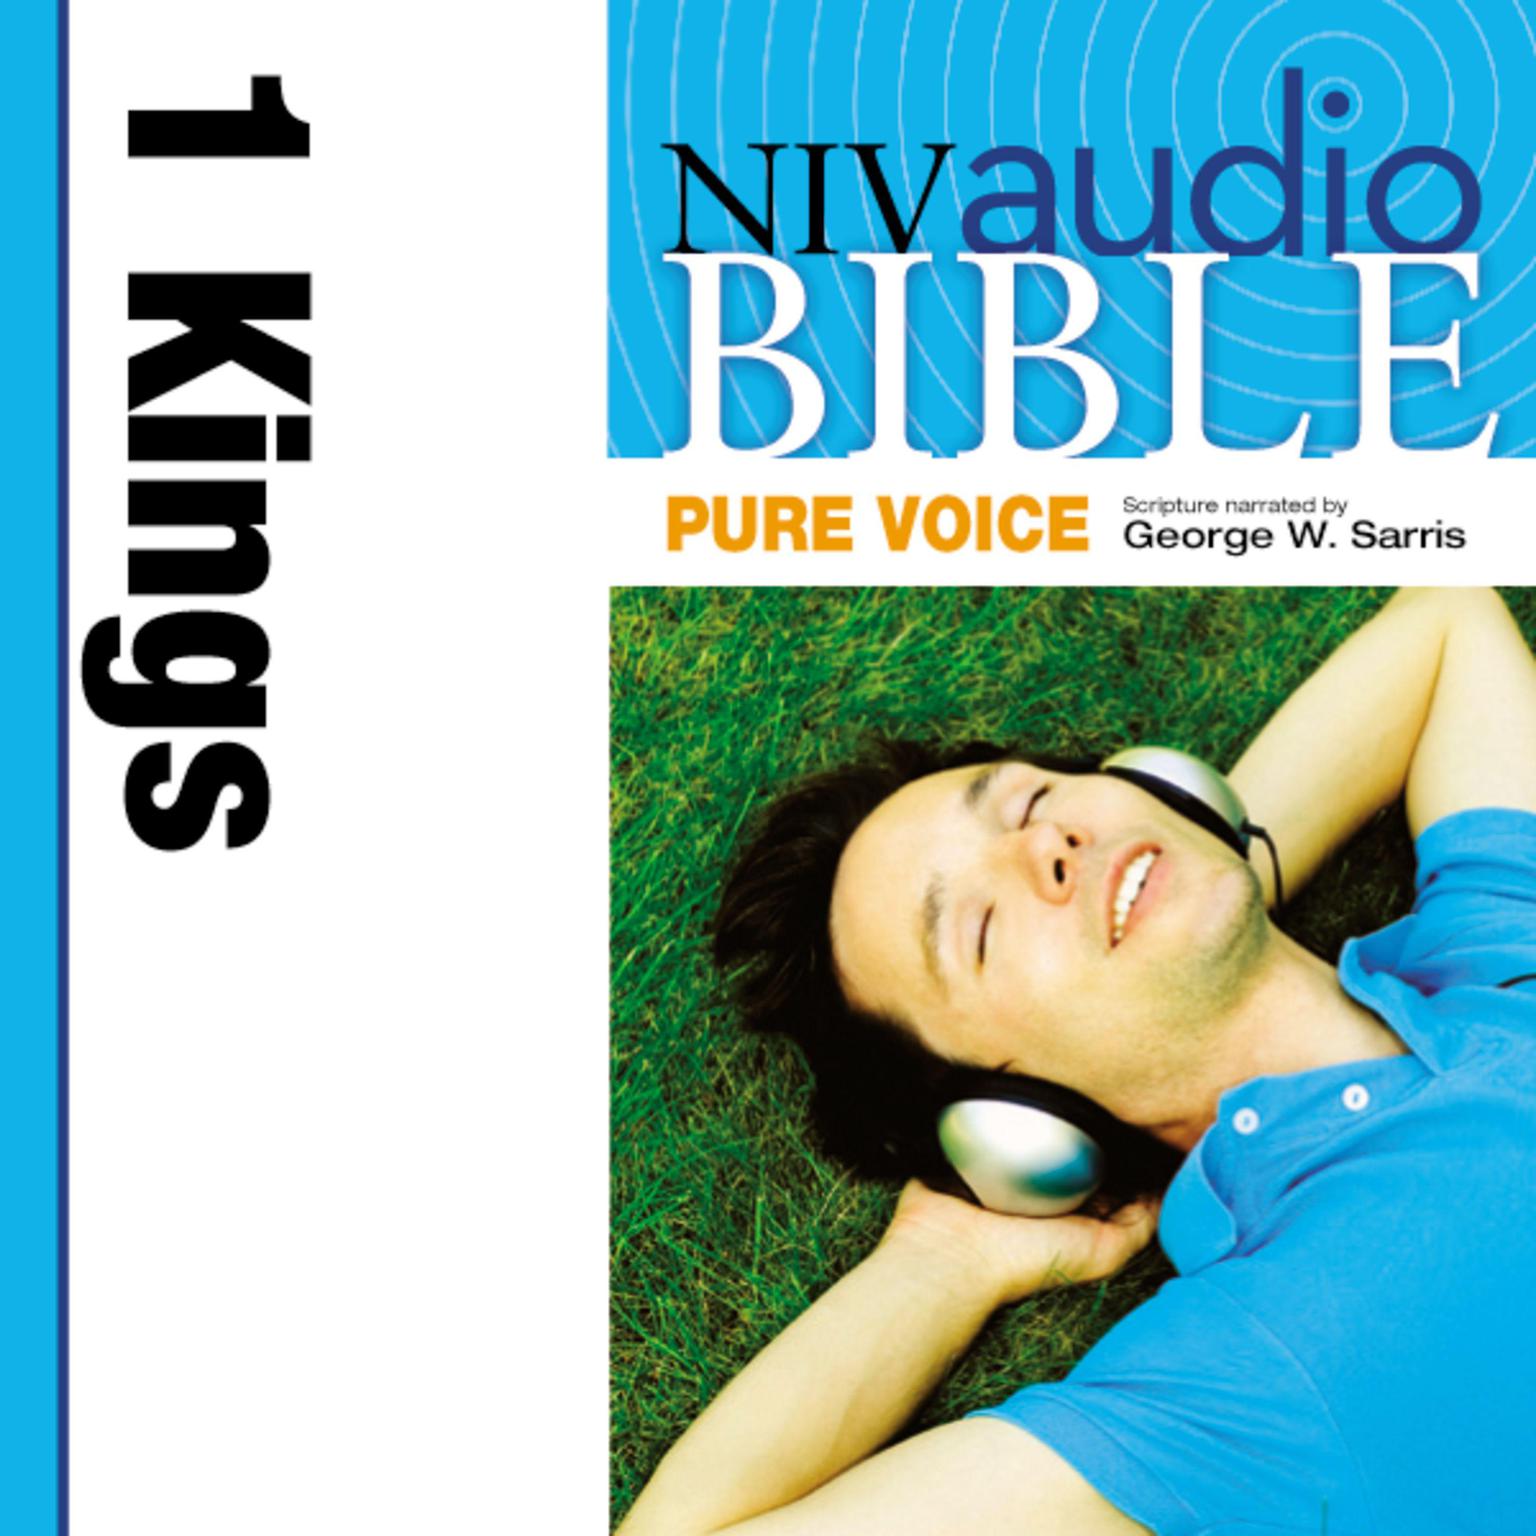 Pure Voice Audio Bible - New International Version, NIV (Narrated by George W. Sarris): (10) 1 Kings Audiobook, by Zondervan